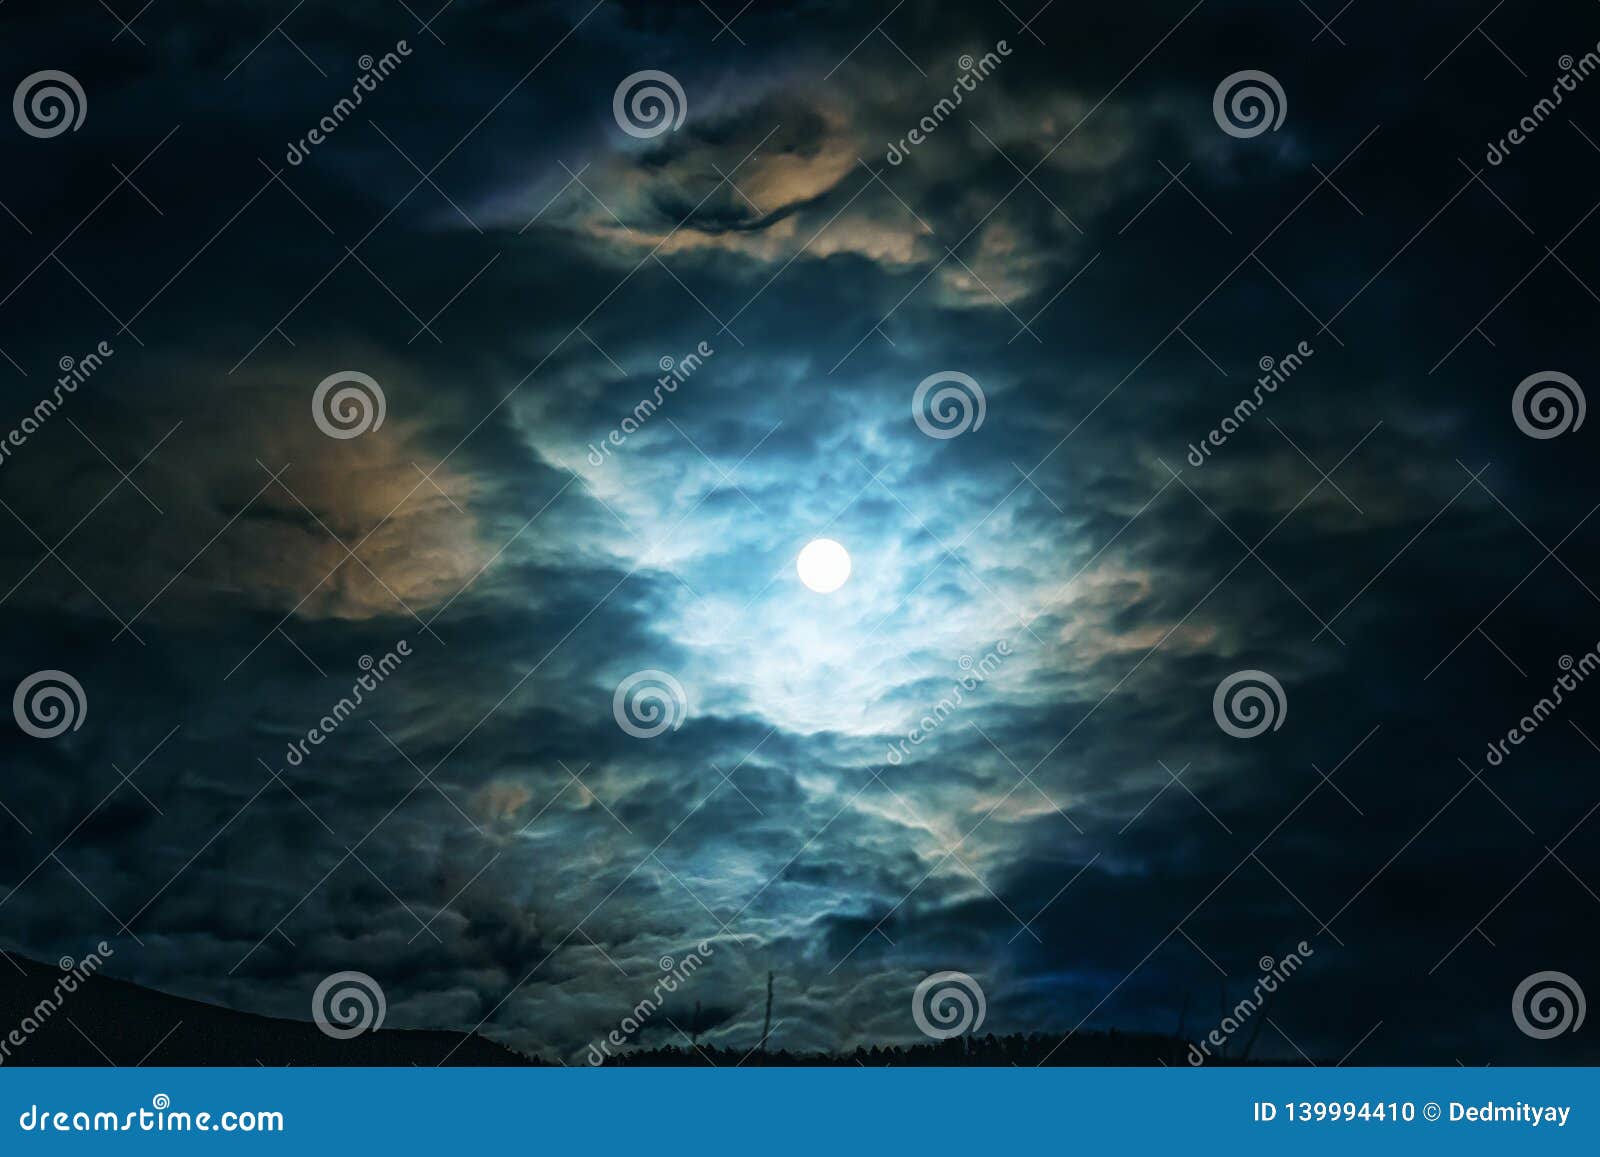 full moon or supermoon in night blue sky with clouds, dramatic mysterious atmosphere